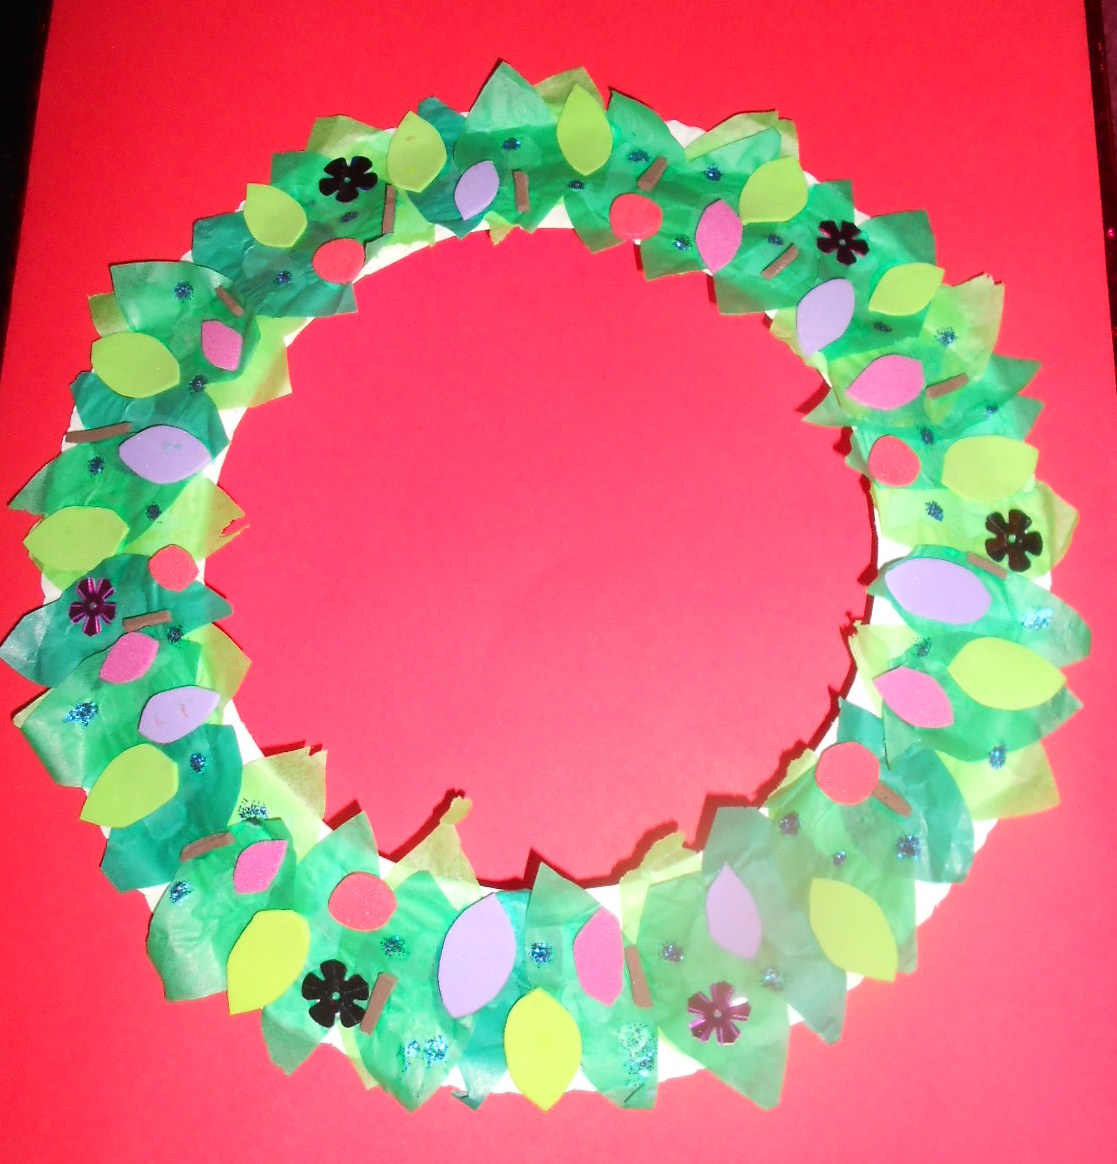 James&May Arts and Crafts Blog: Paper Plate Christmas Wreath